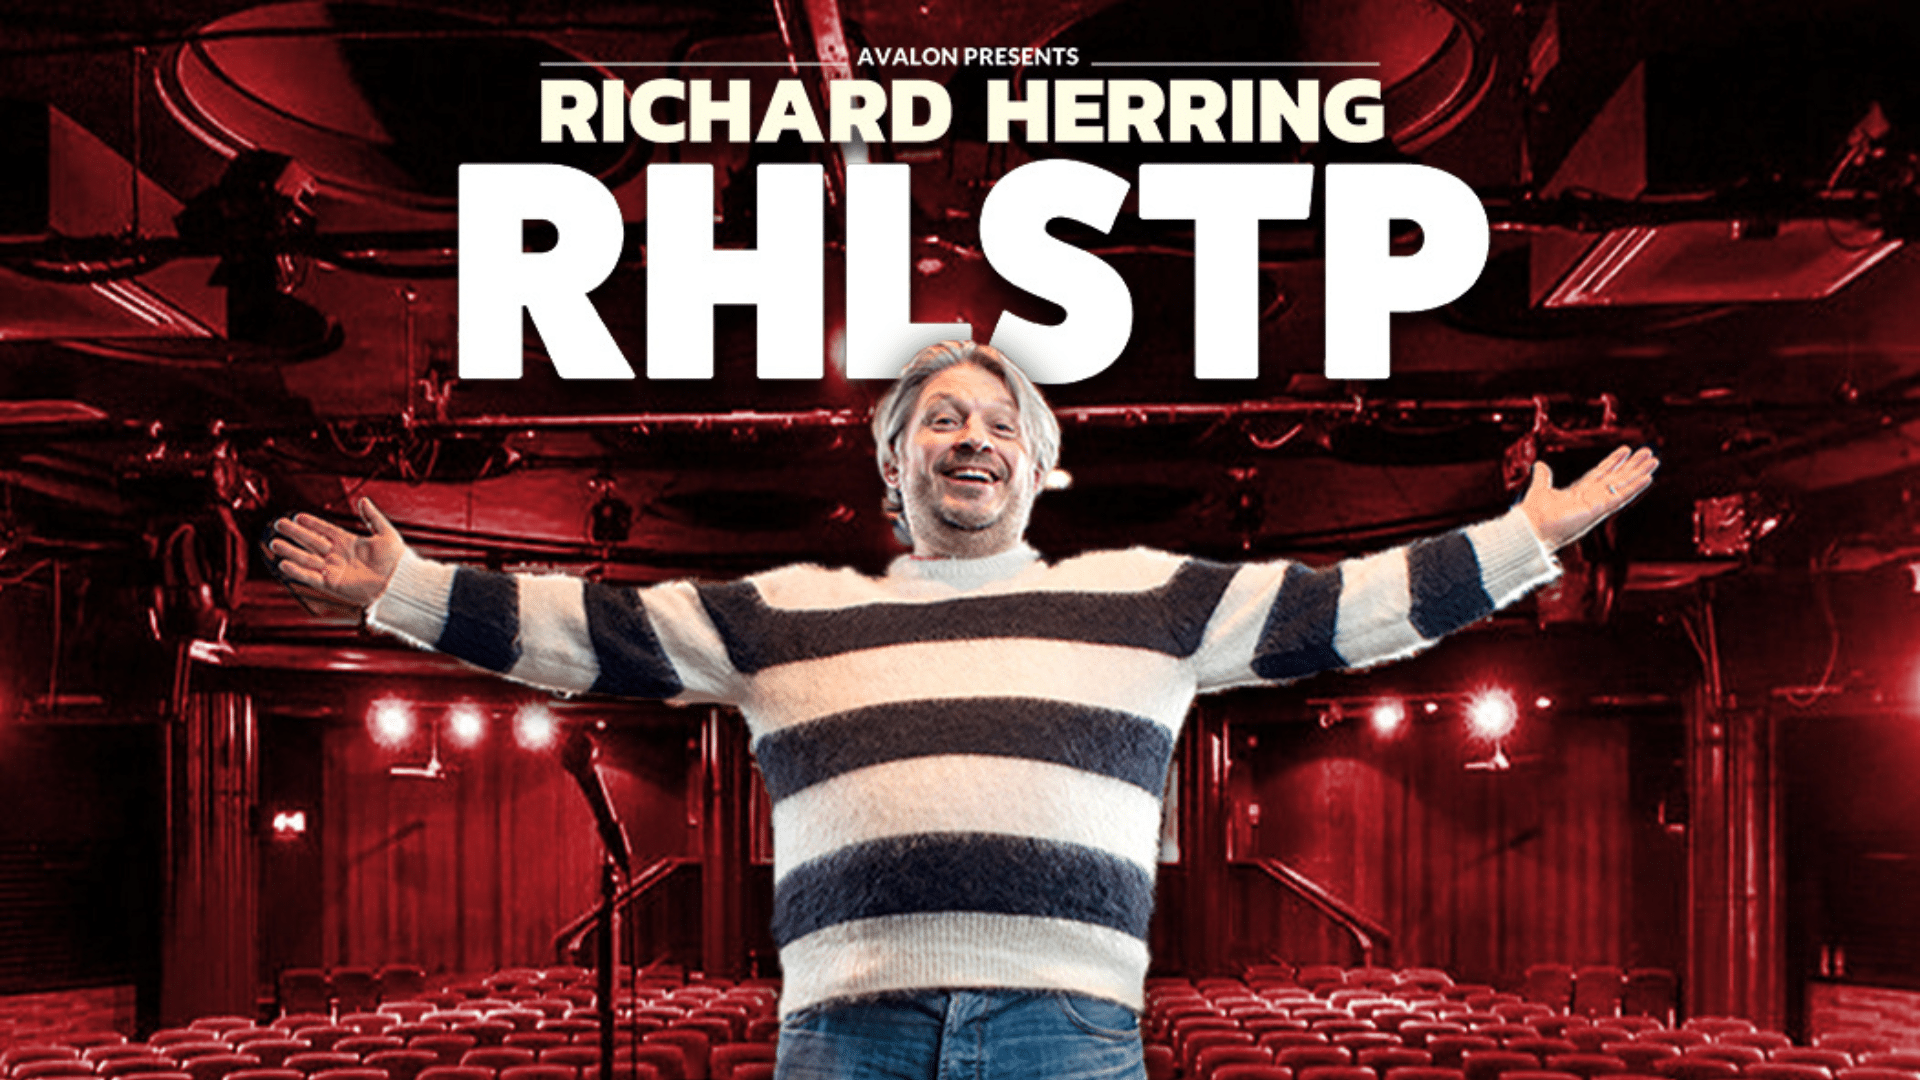 RHLSTP promotional artwork - Comedian Richard Herring, wearing a black and white striped jumper and blue jeans, stands facing forwards, with his arms outstretched in a welcoming pose. He wears a big smile on his face. Behind him is a microphone on a stand and an empty theatre auditorium. White text above reads: 'Avalon presents Richard Herring RHLSTP'.